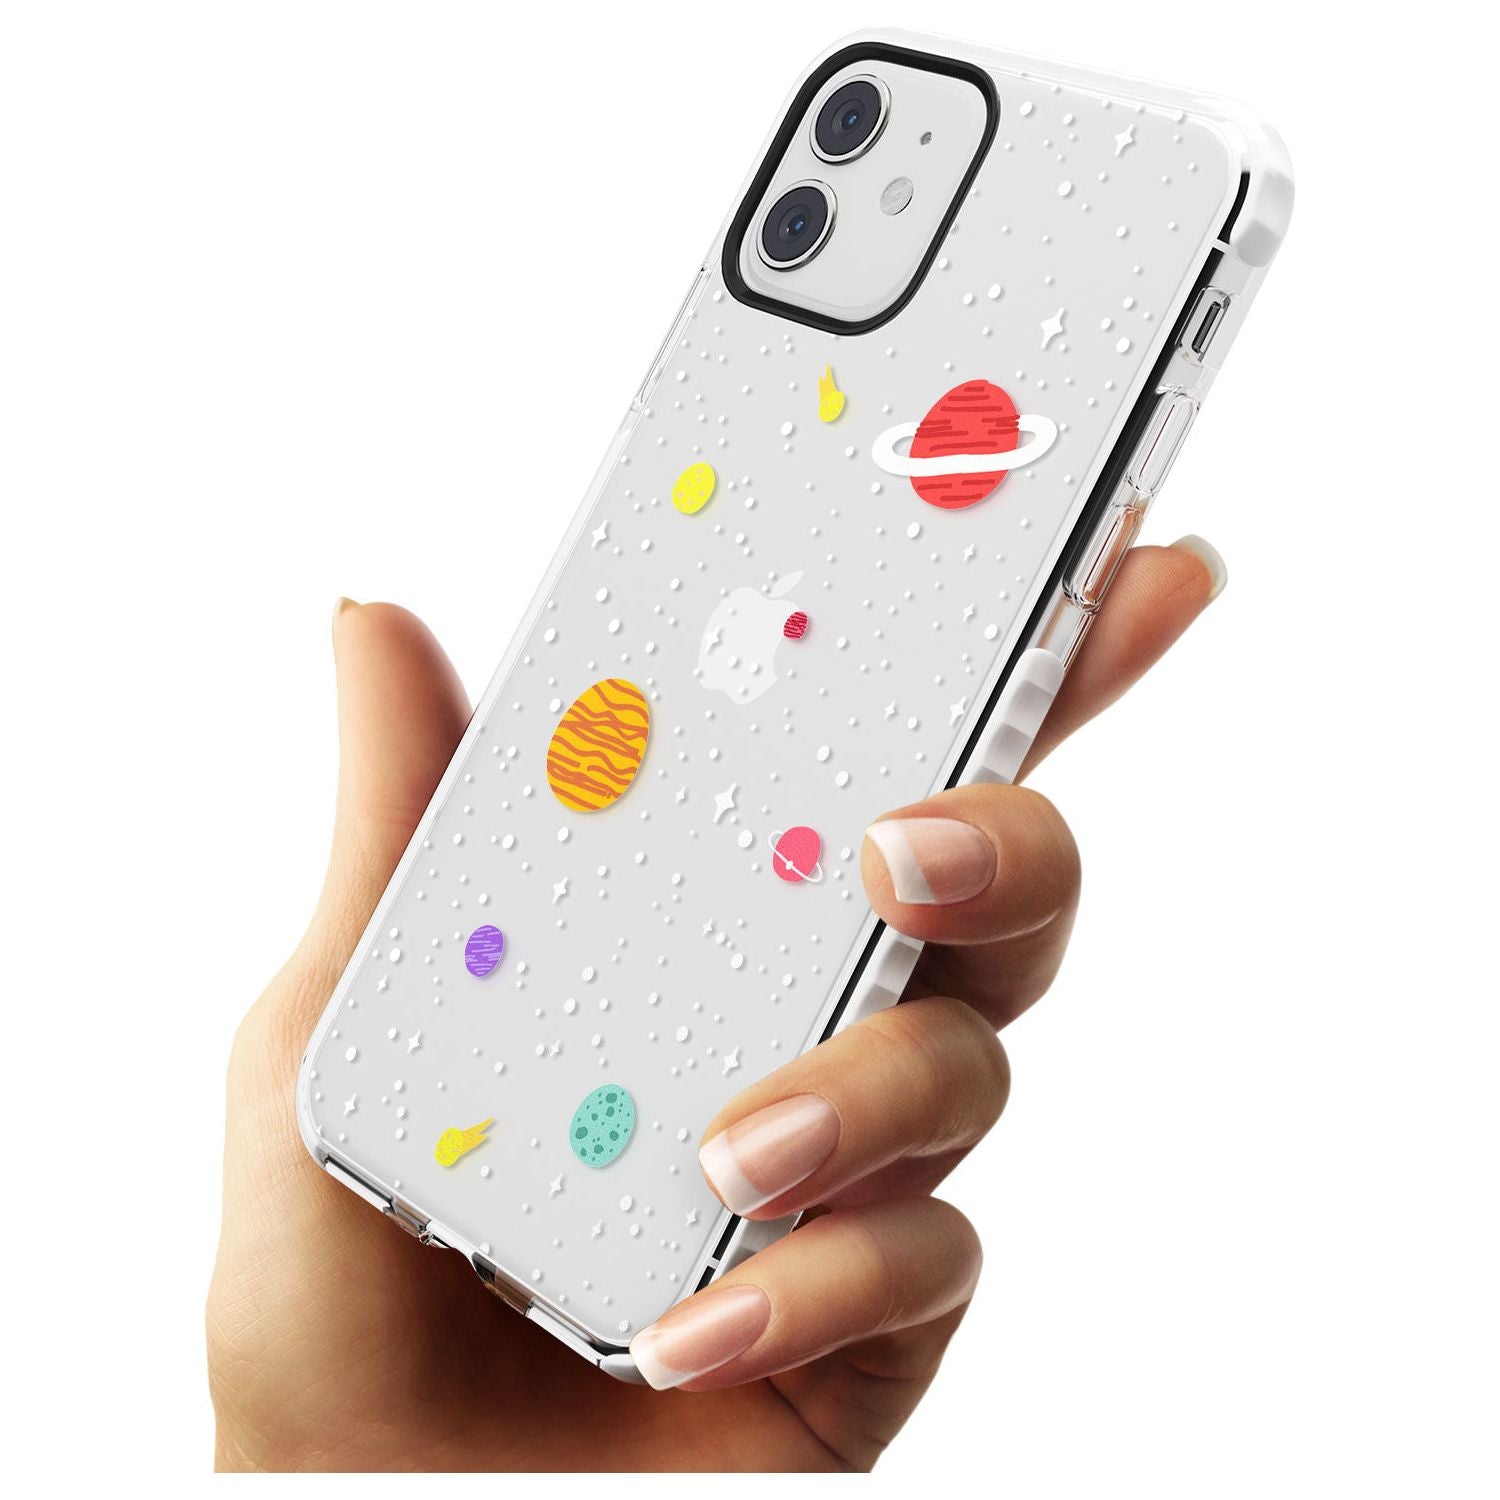 Cute Cartoon Planets (Clear) Impact Phone Case for iPhone 11